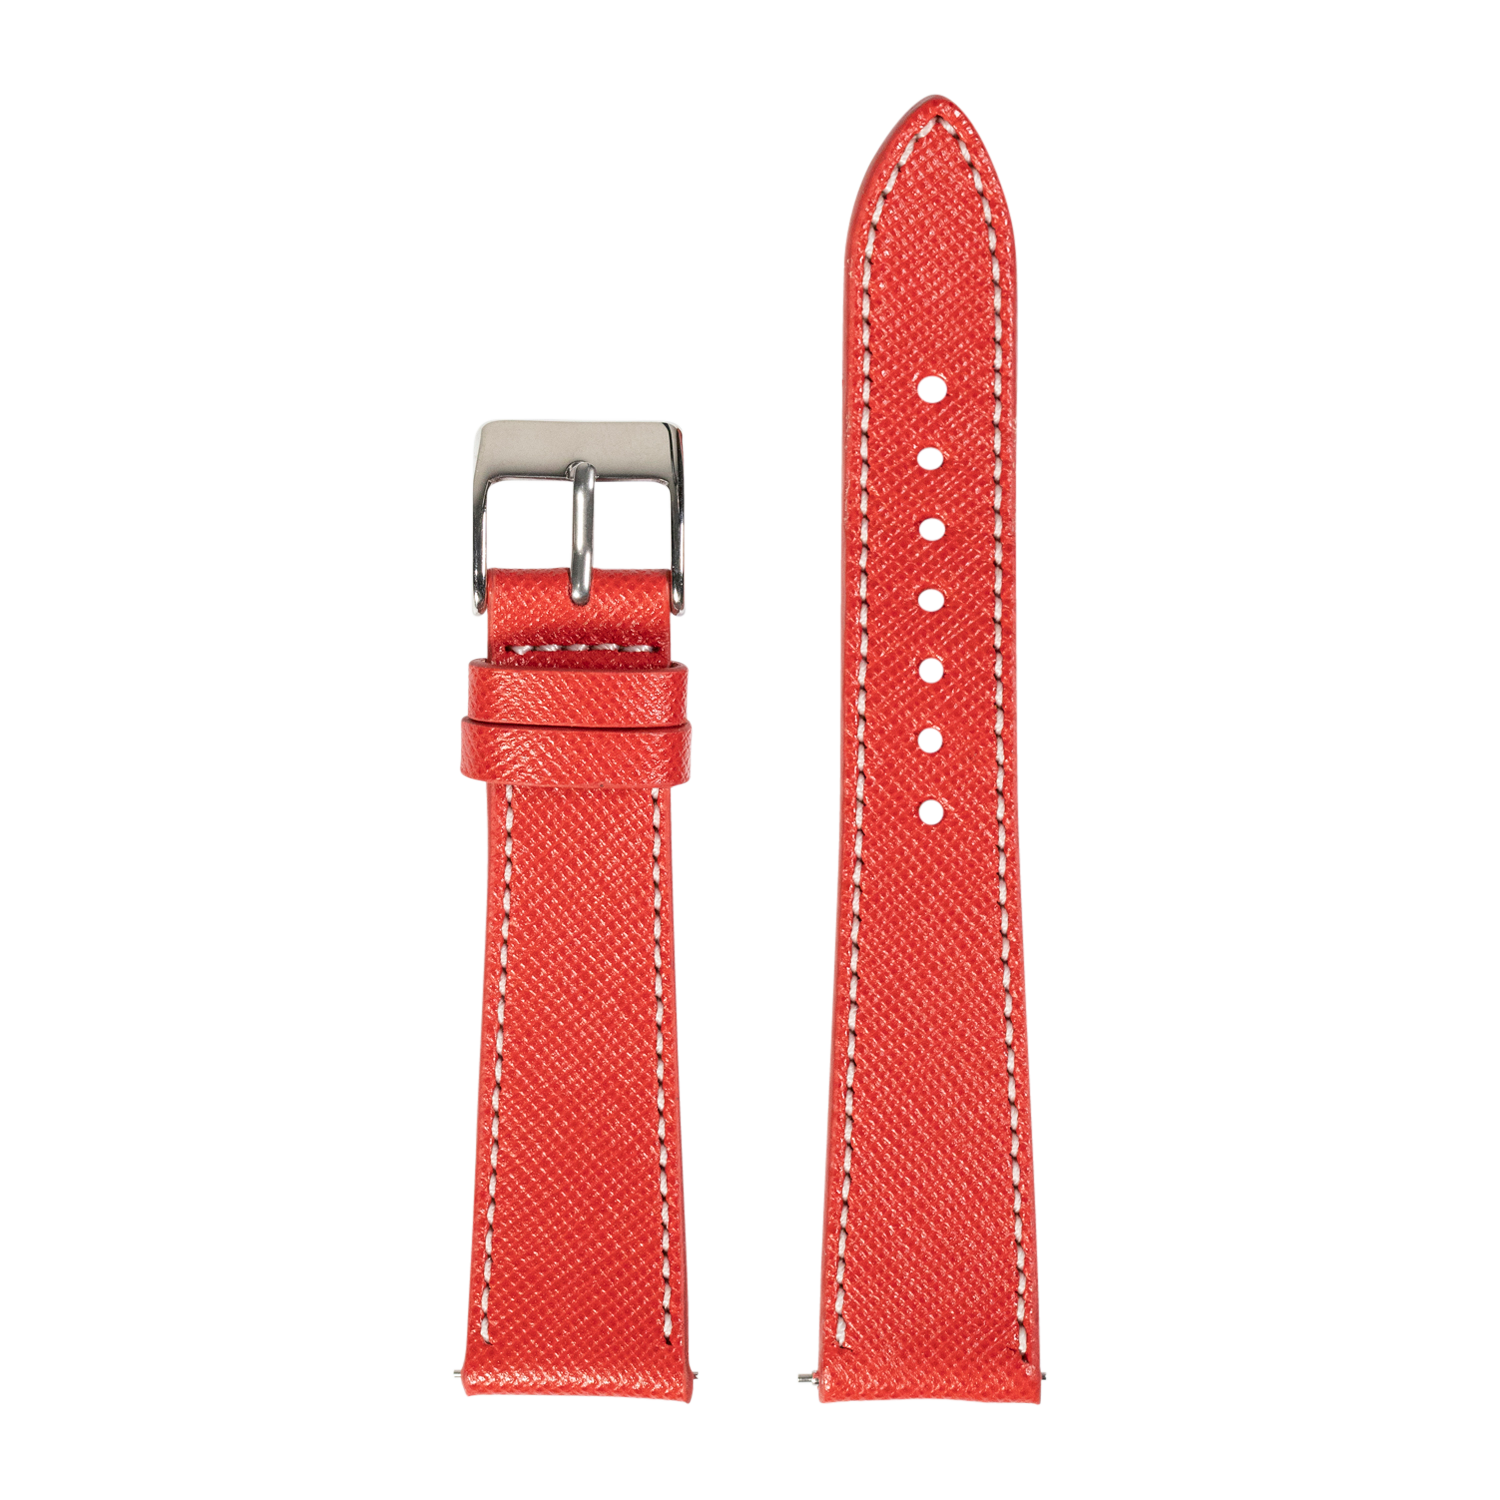 [QuickFit] Saffiano Leather - Red with White Stitching 22mm